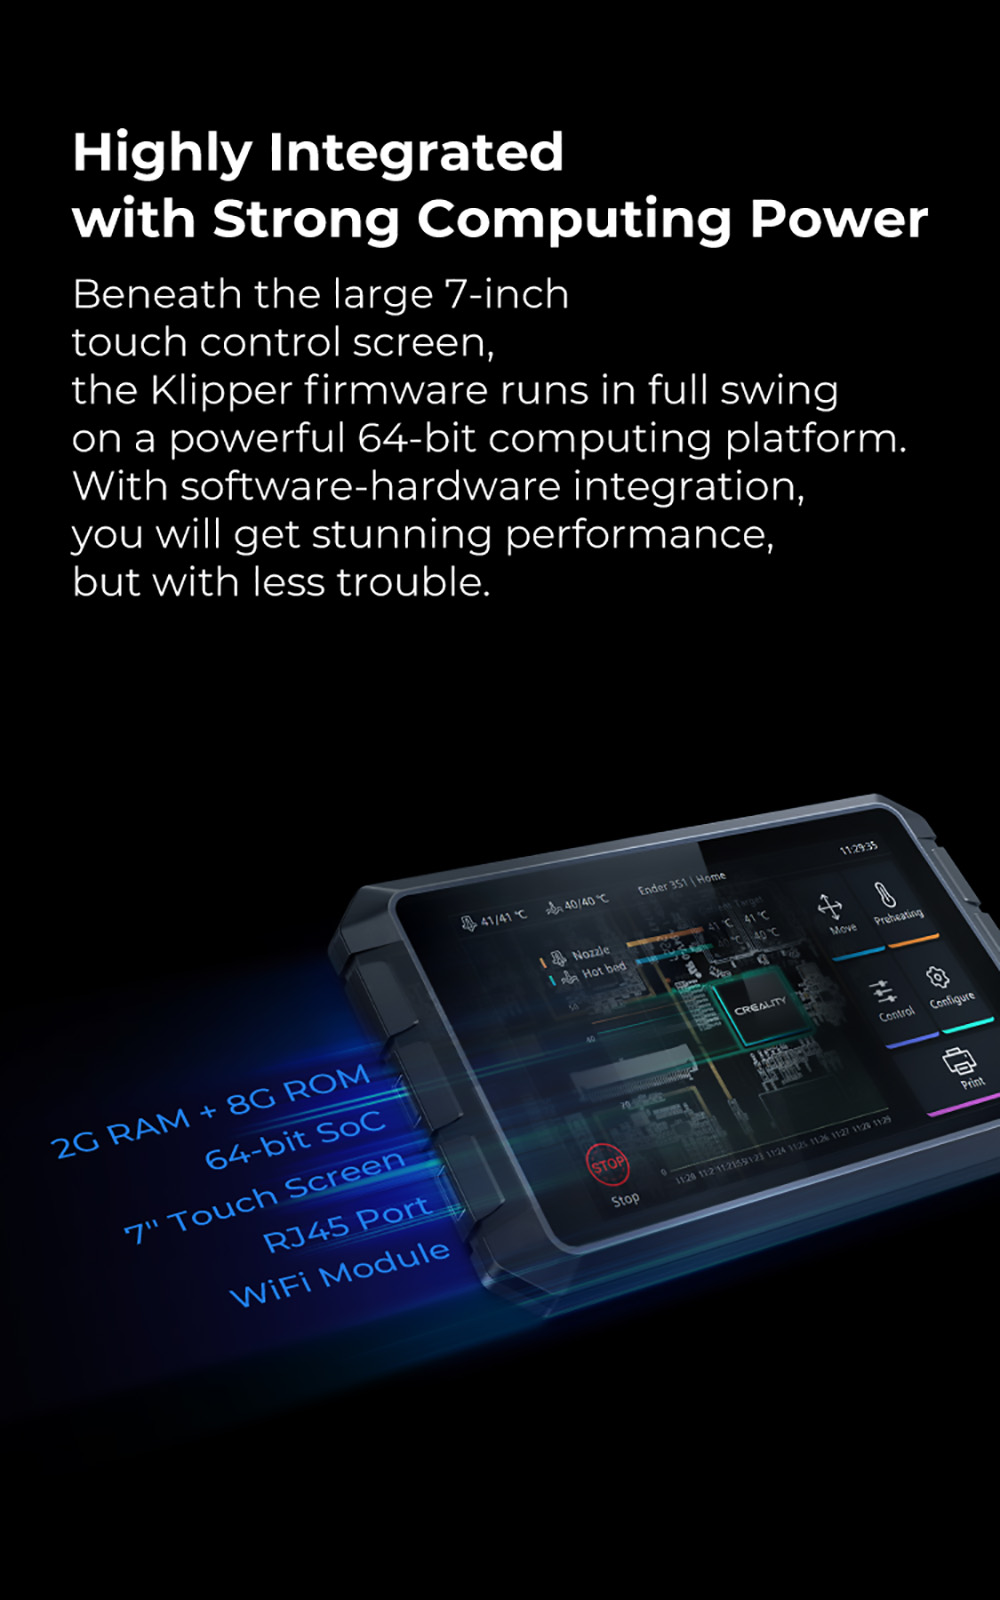 Creality Sonic Pad, Open Source 3D Printing Pad Based on Klipper, 7-inch Precise Control Screen, 1024x600 Resolution, 64-bit Mainboard - Black